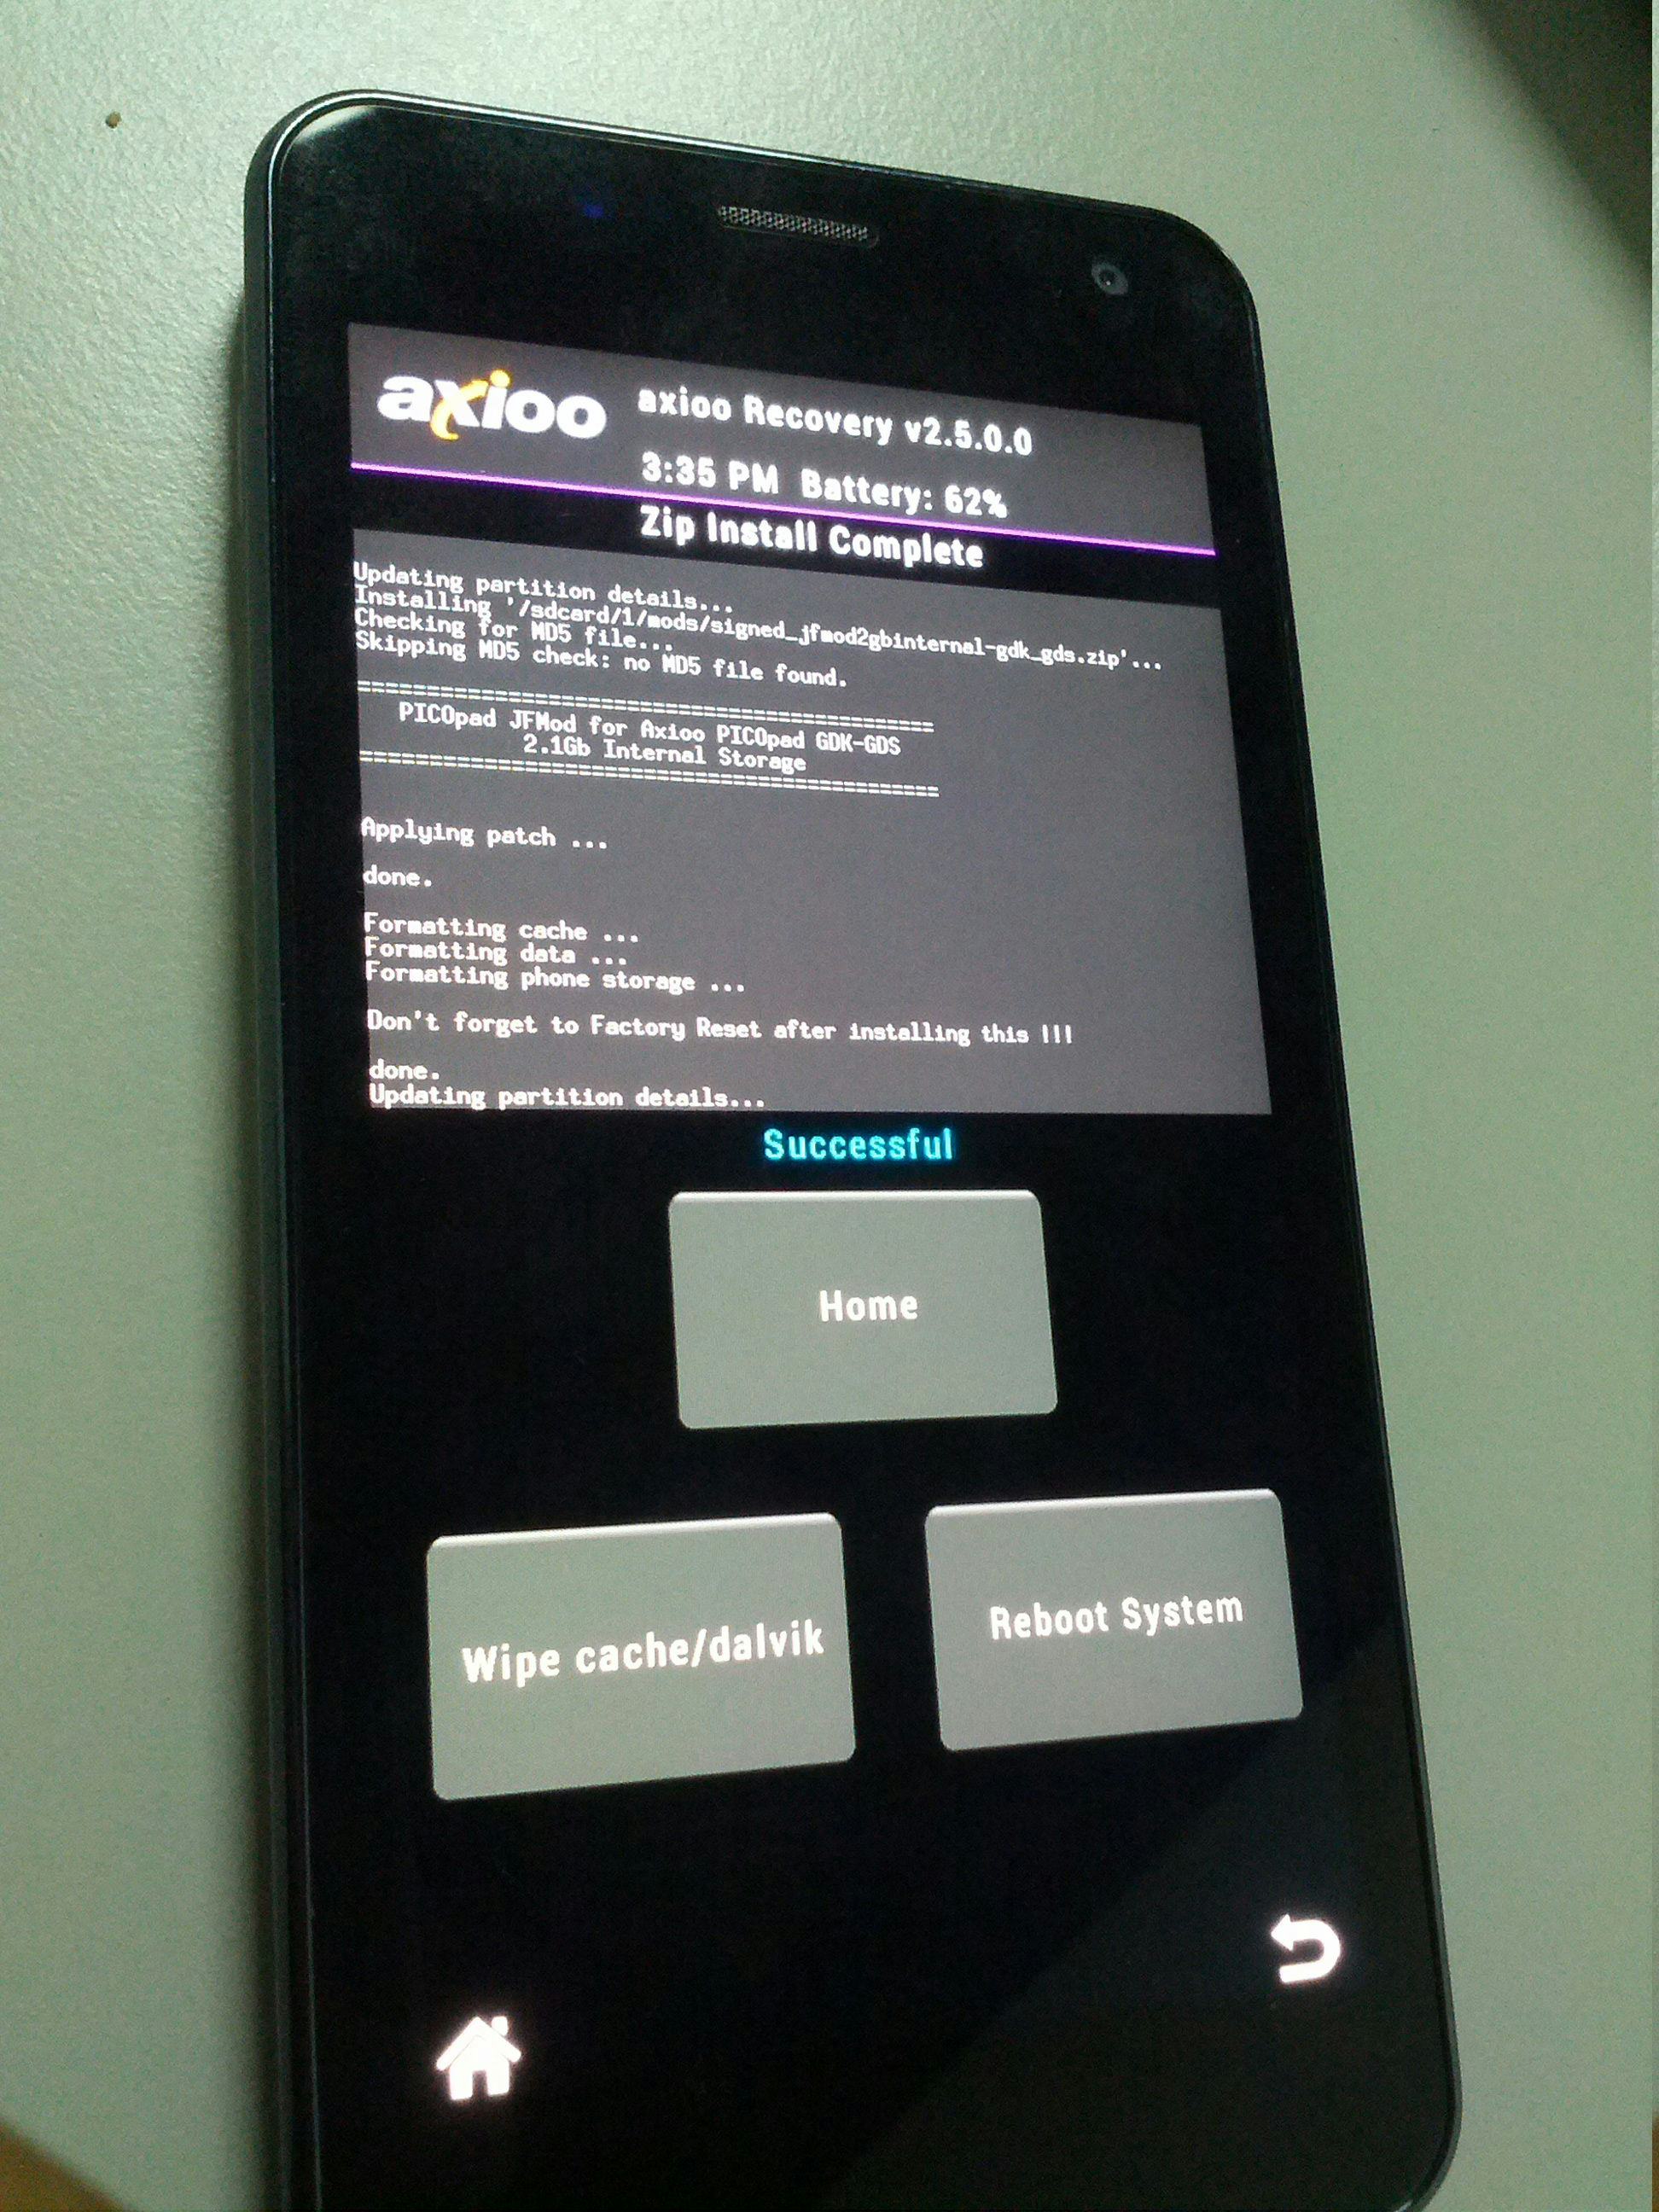 twrp and cwm recovery PICOpad GDK-GDS